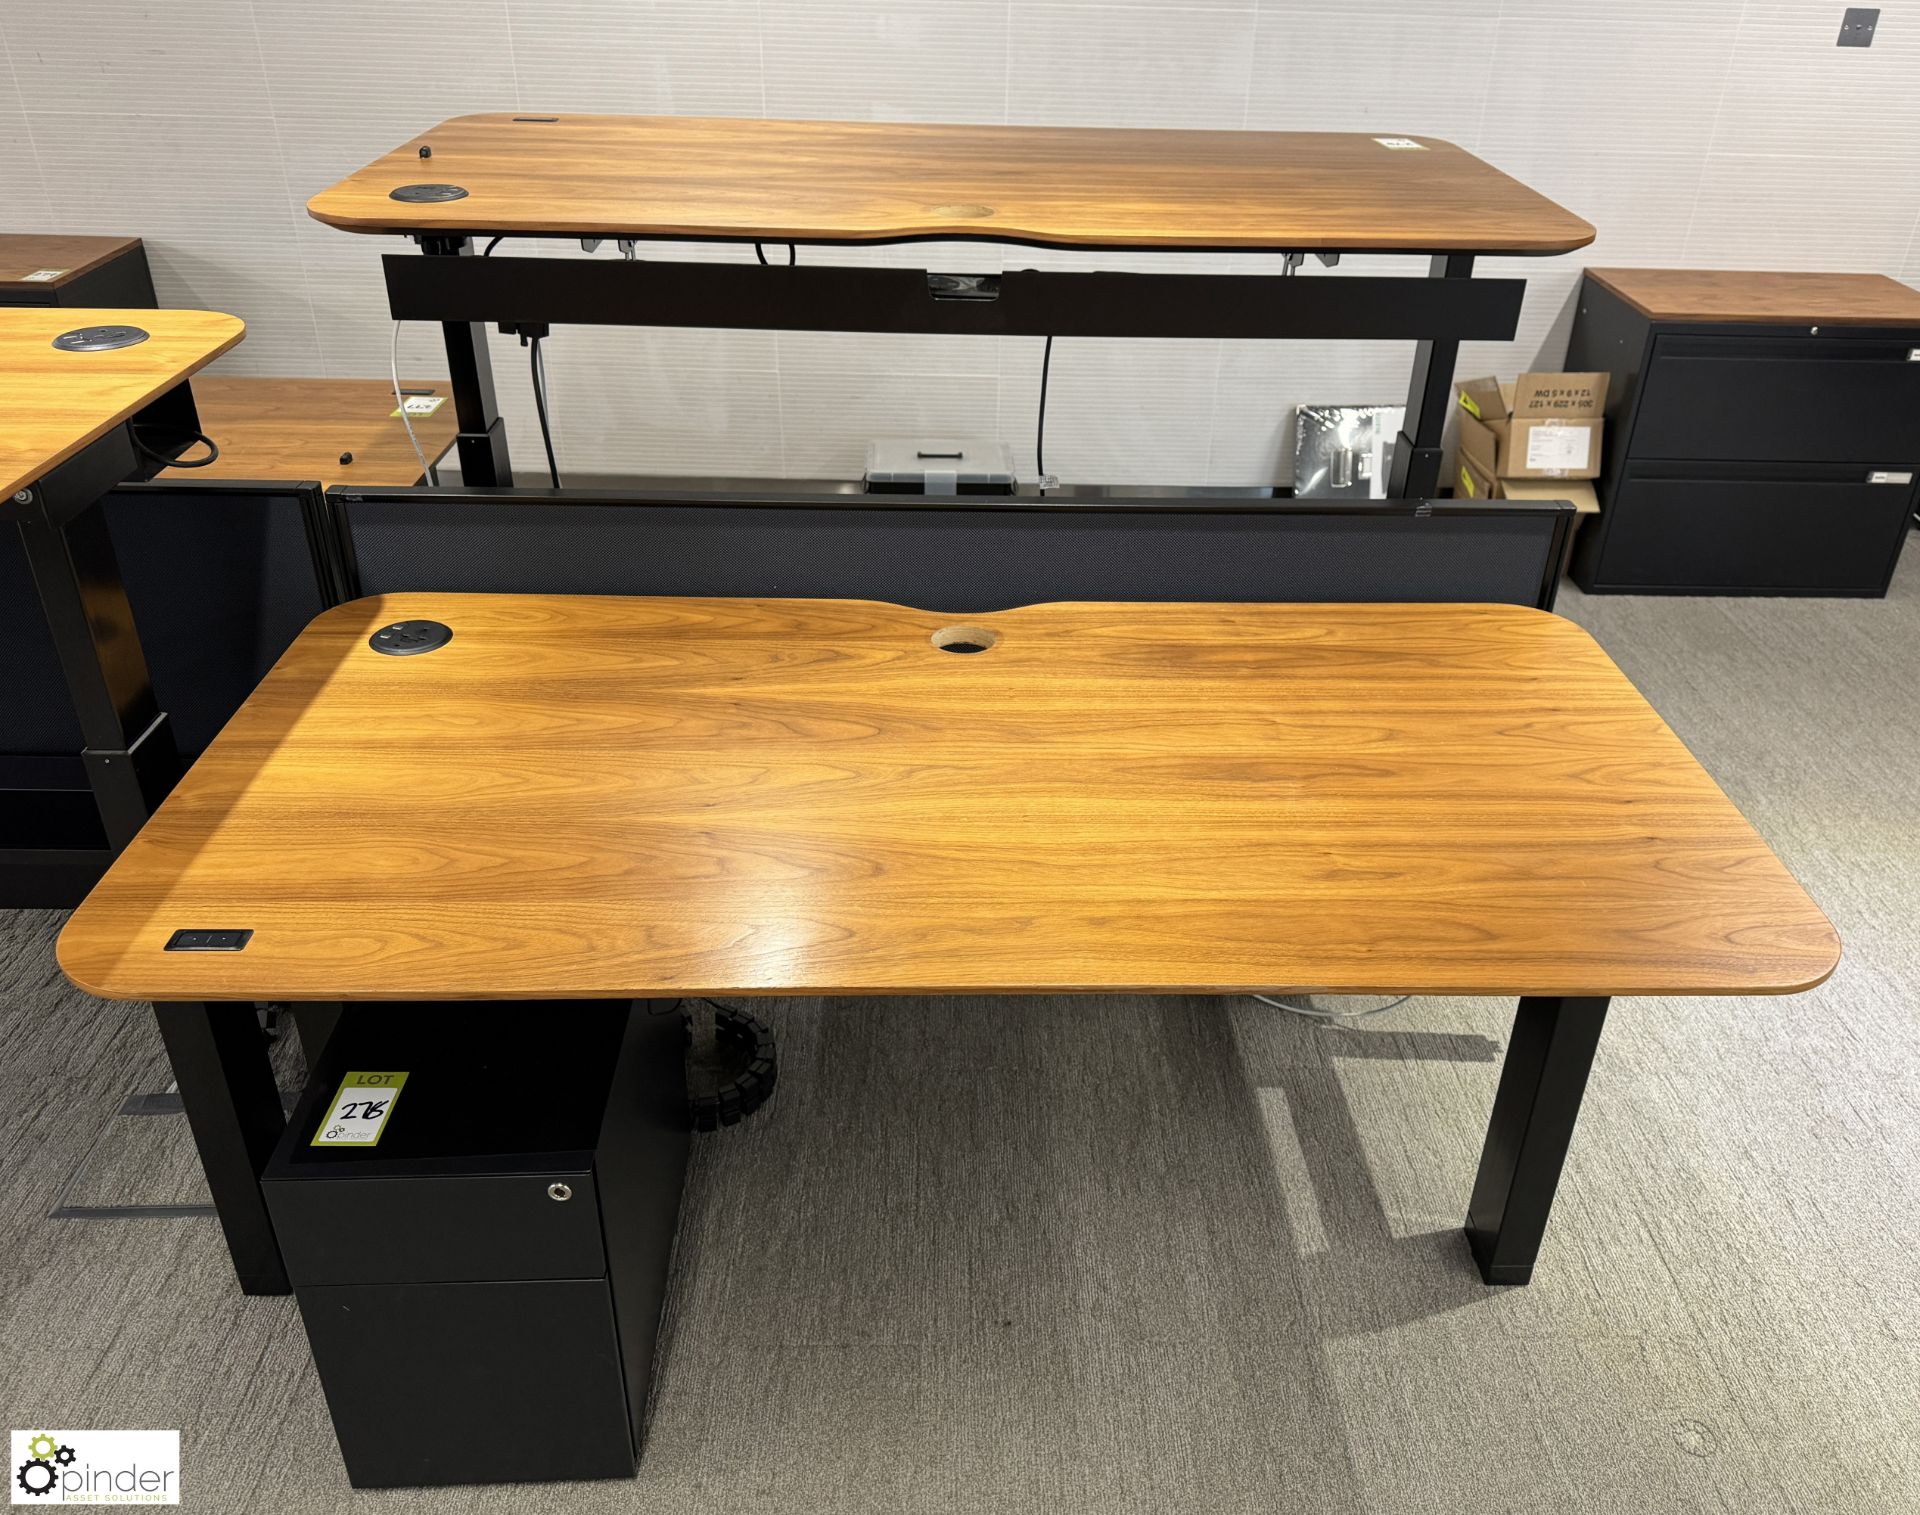 OMT back to back powered rise and fall Desks, 1600mm x 800mm per desk leaf, cherry veneer, with - Image 2 of 7